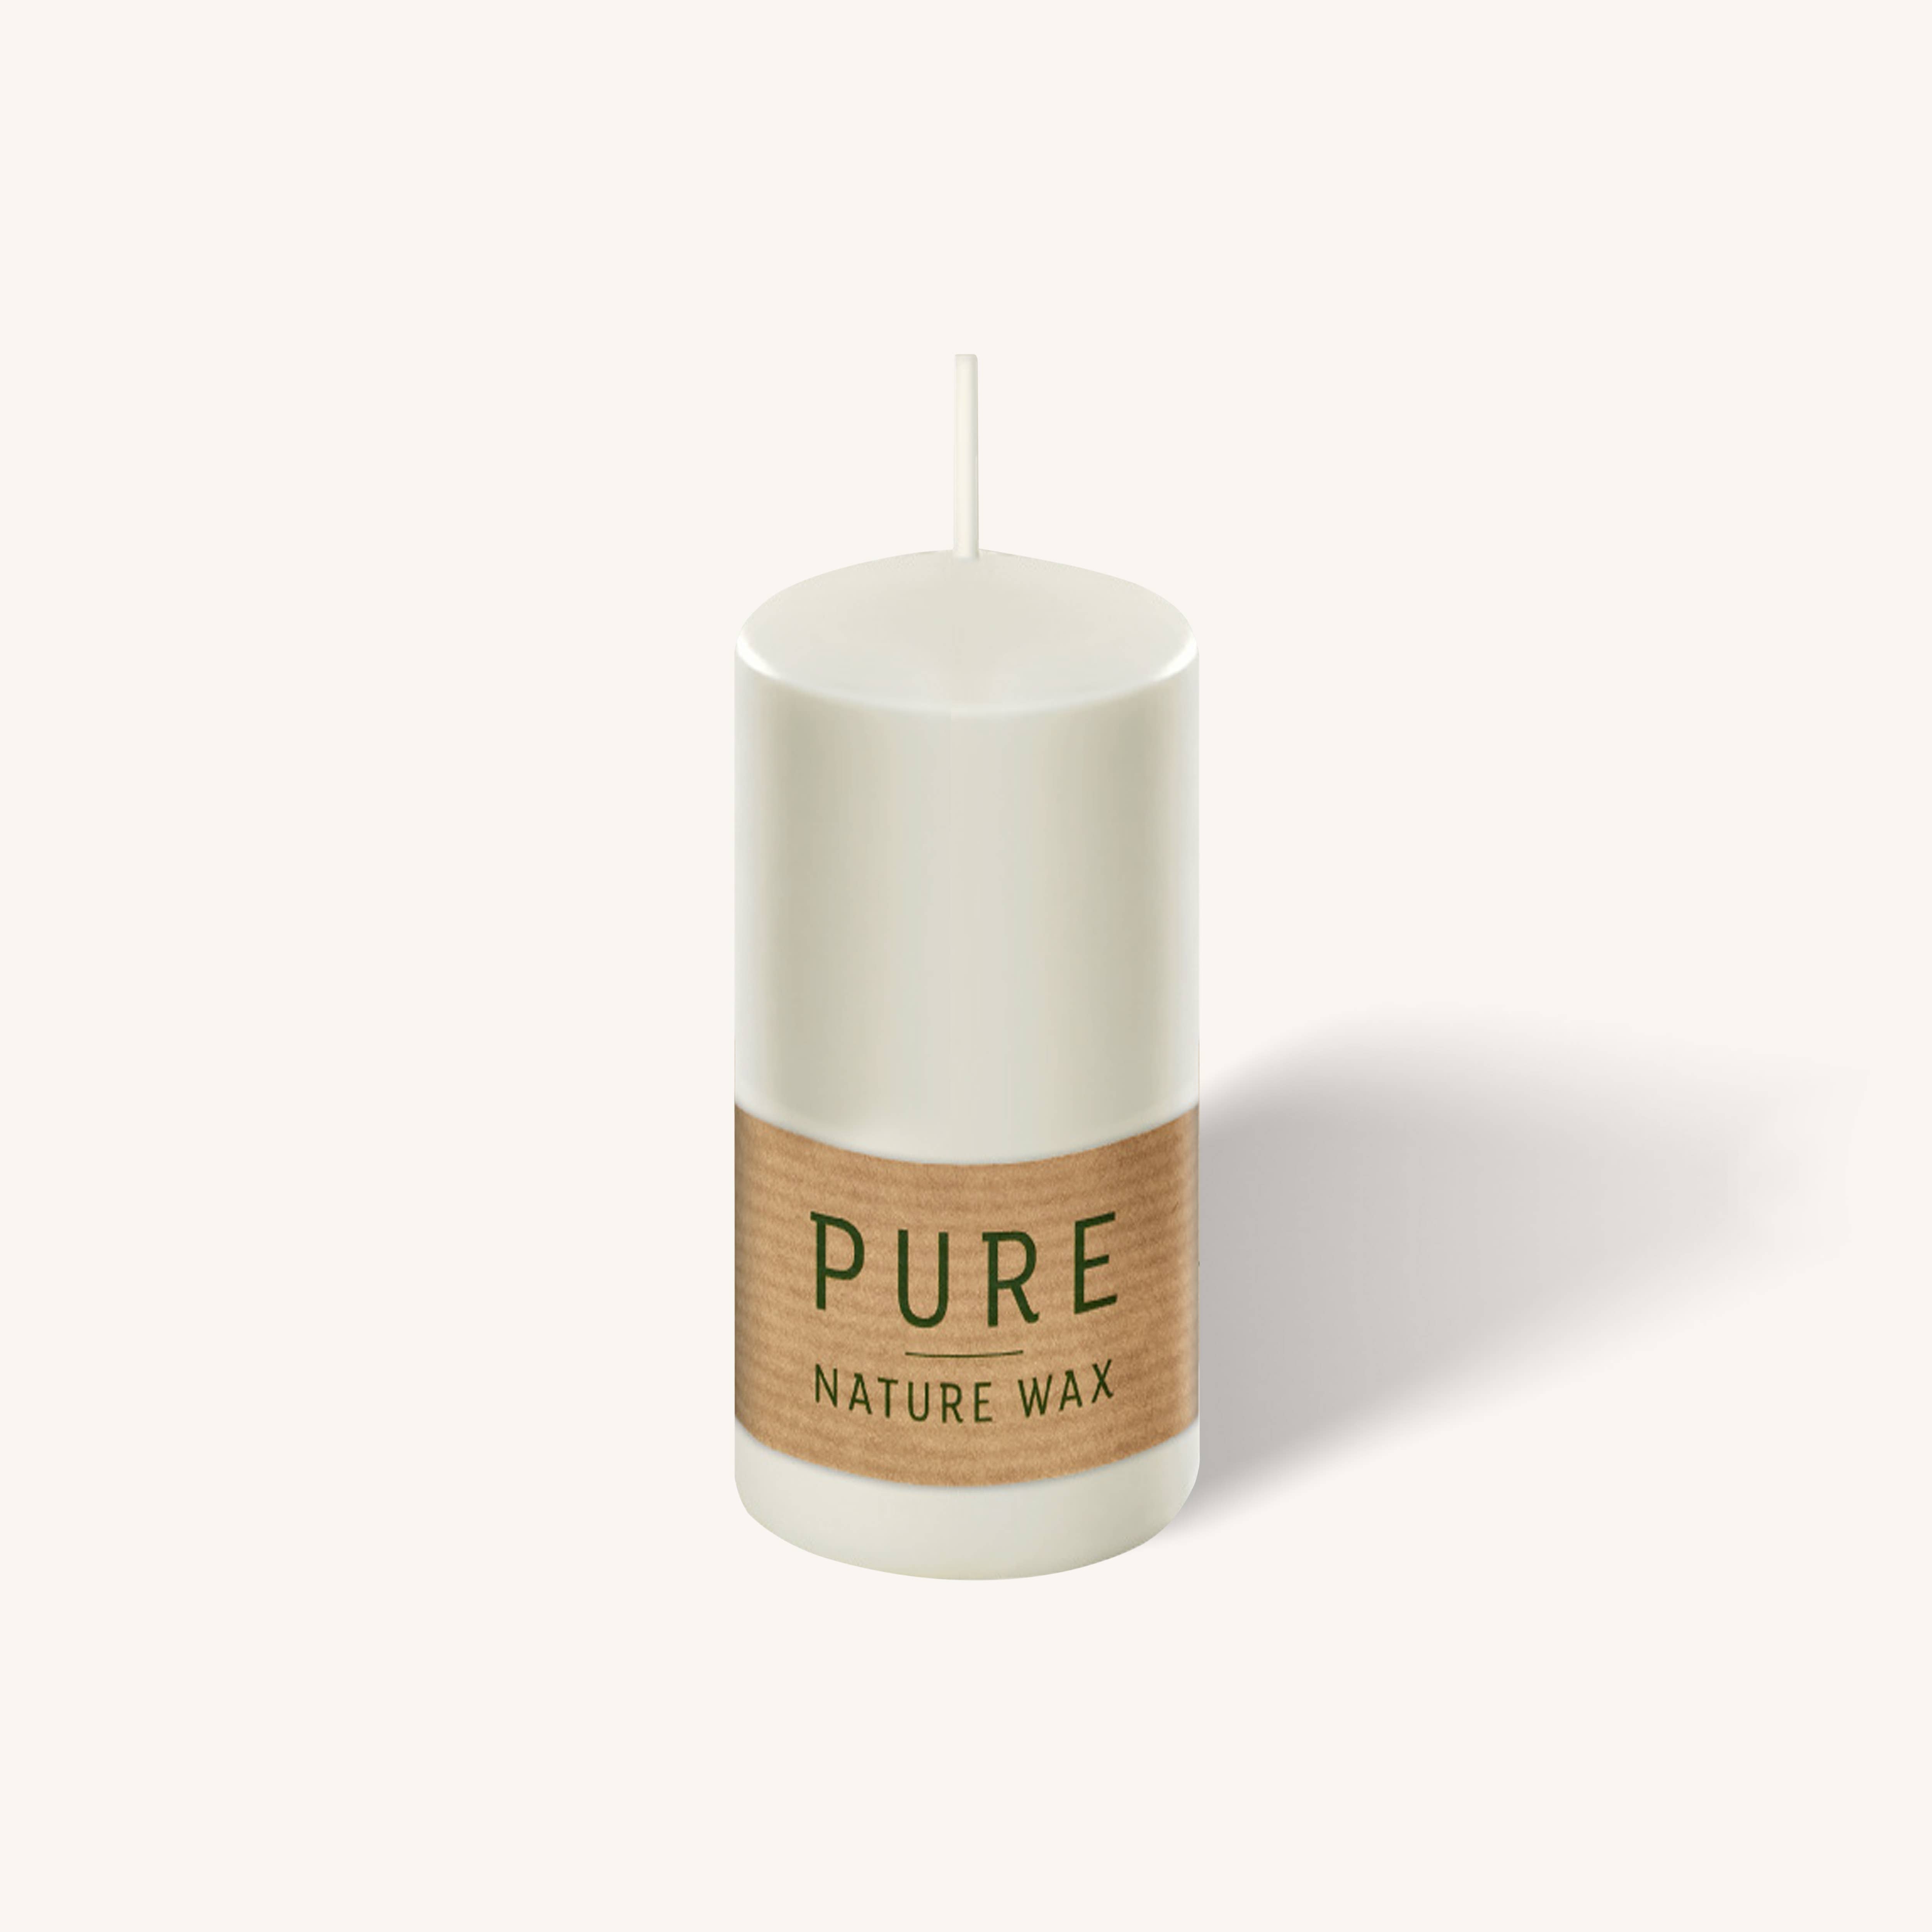 Pure Nature Wax White Pillar Candle - 2.3" x 5" - 4 Pack